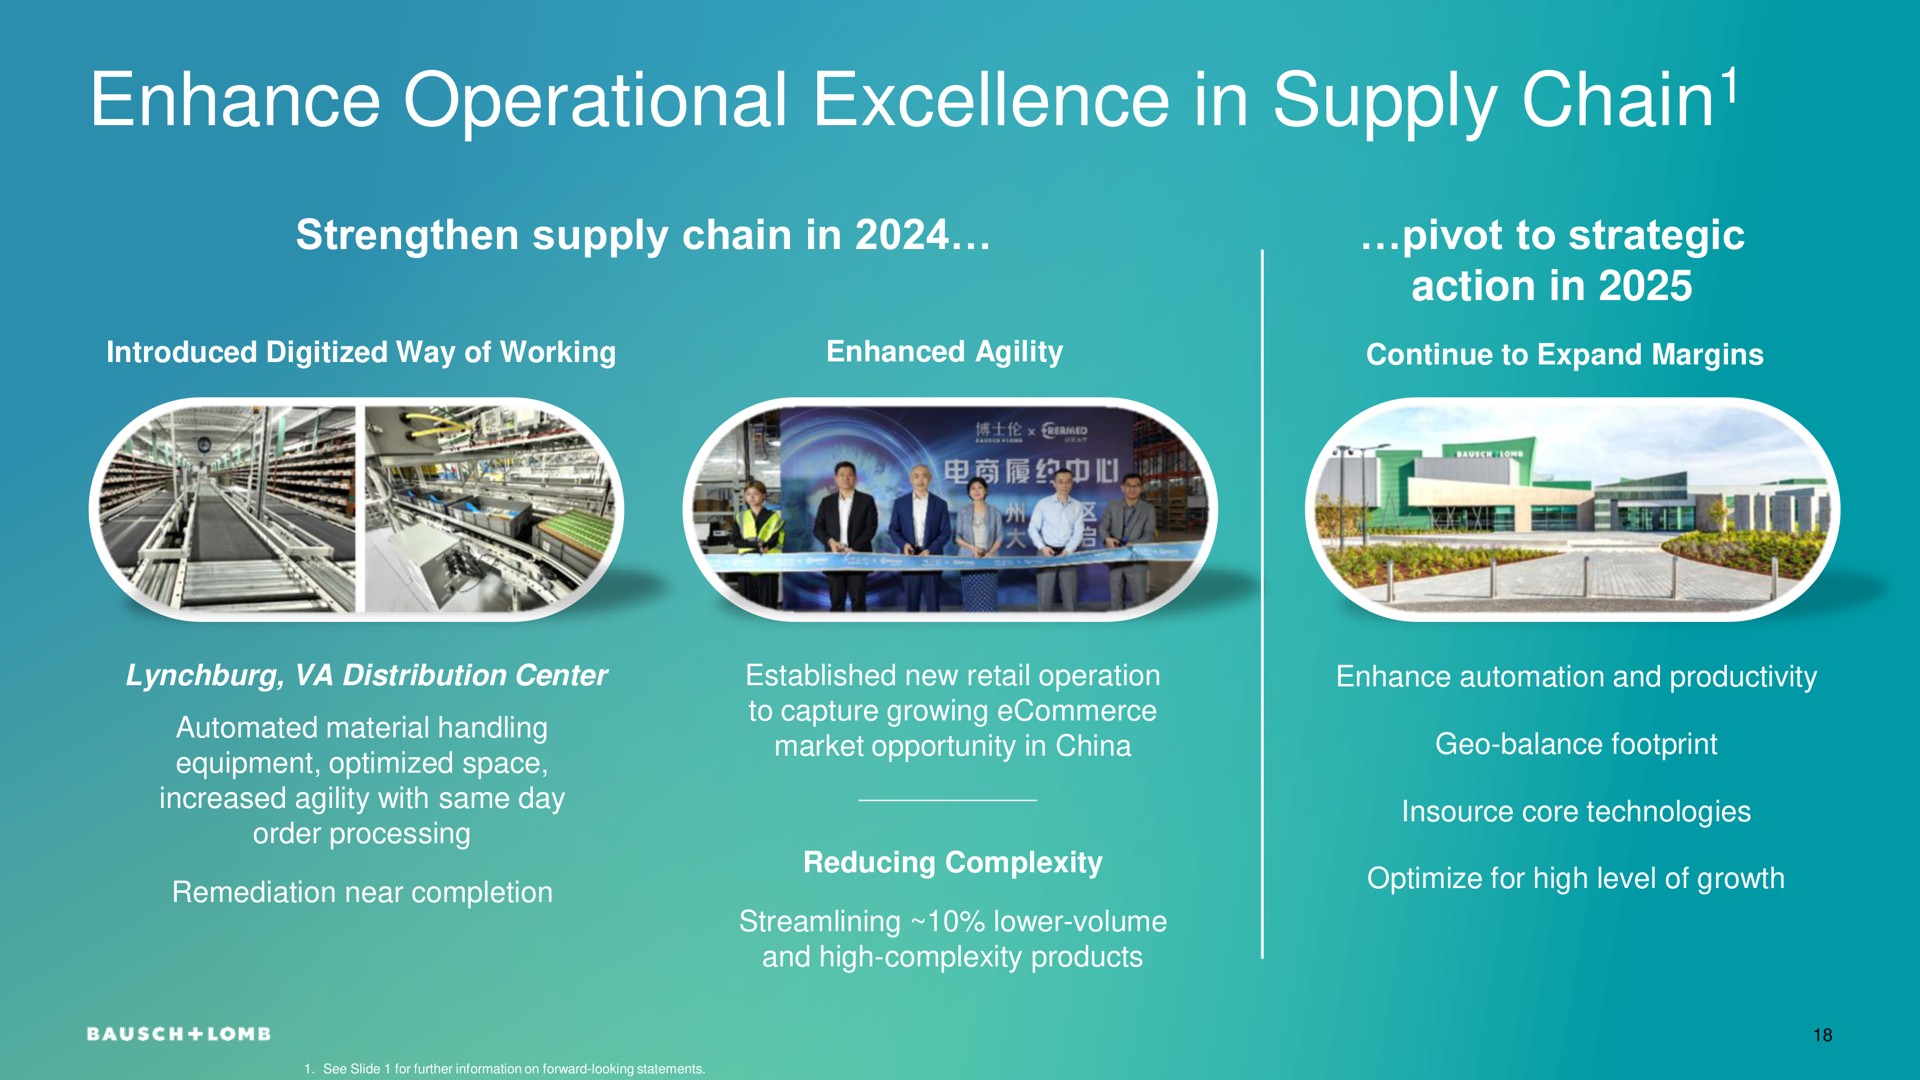 enhance operational excellence in supply chain chain | Bausch+Lomb